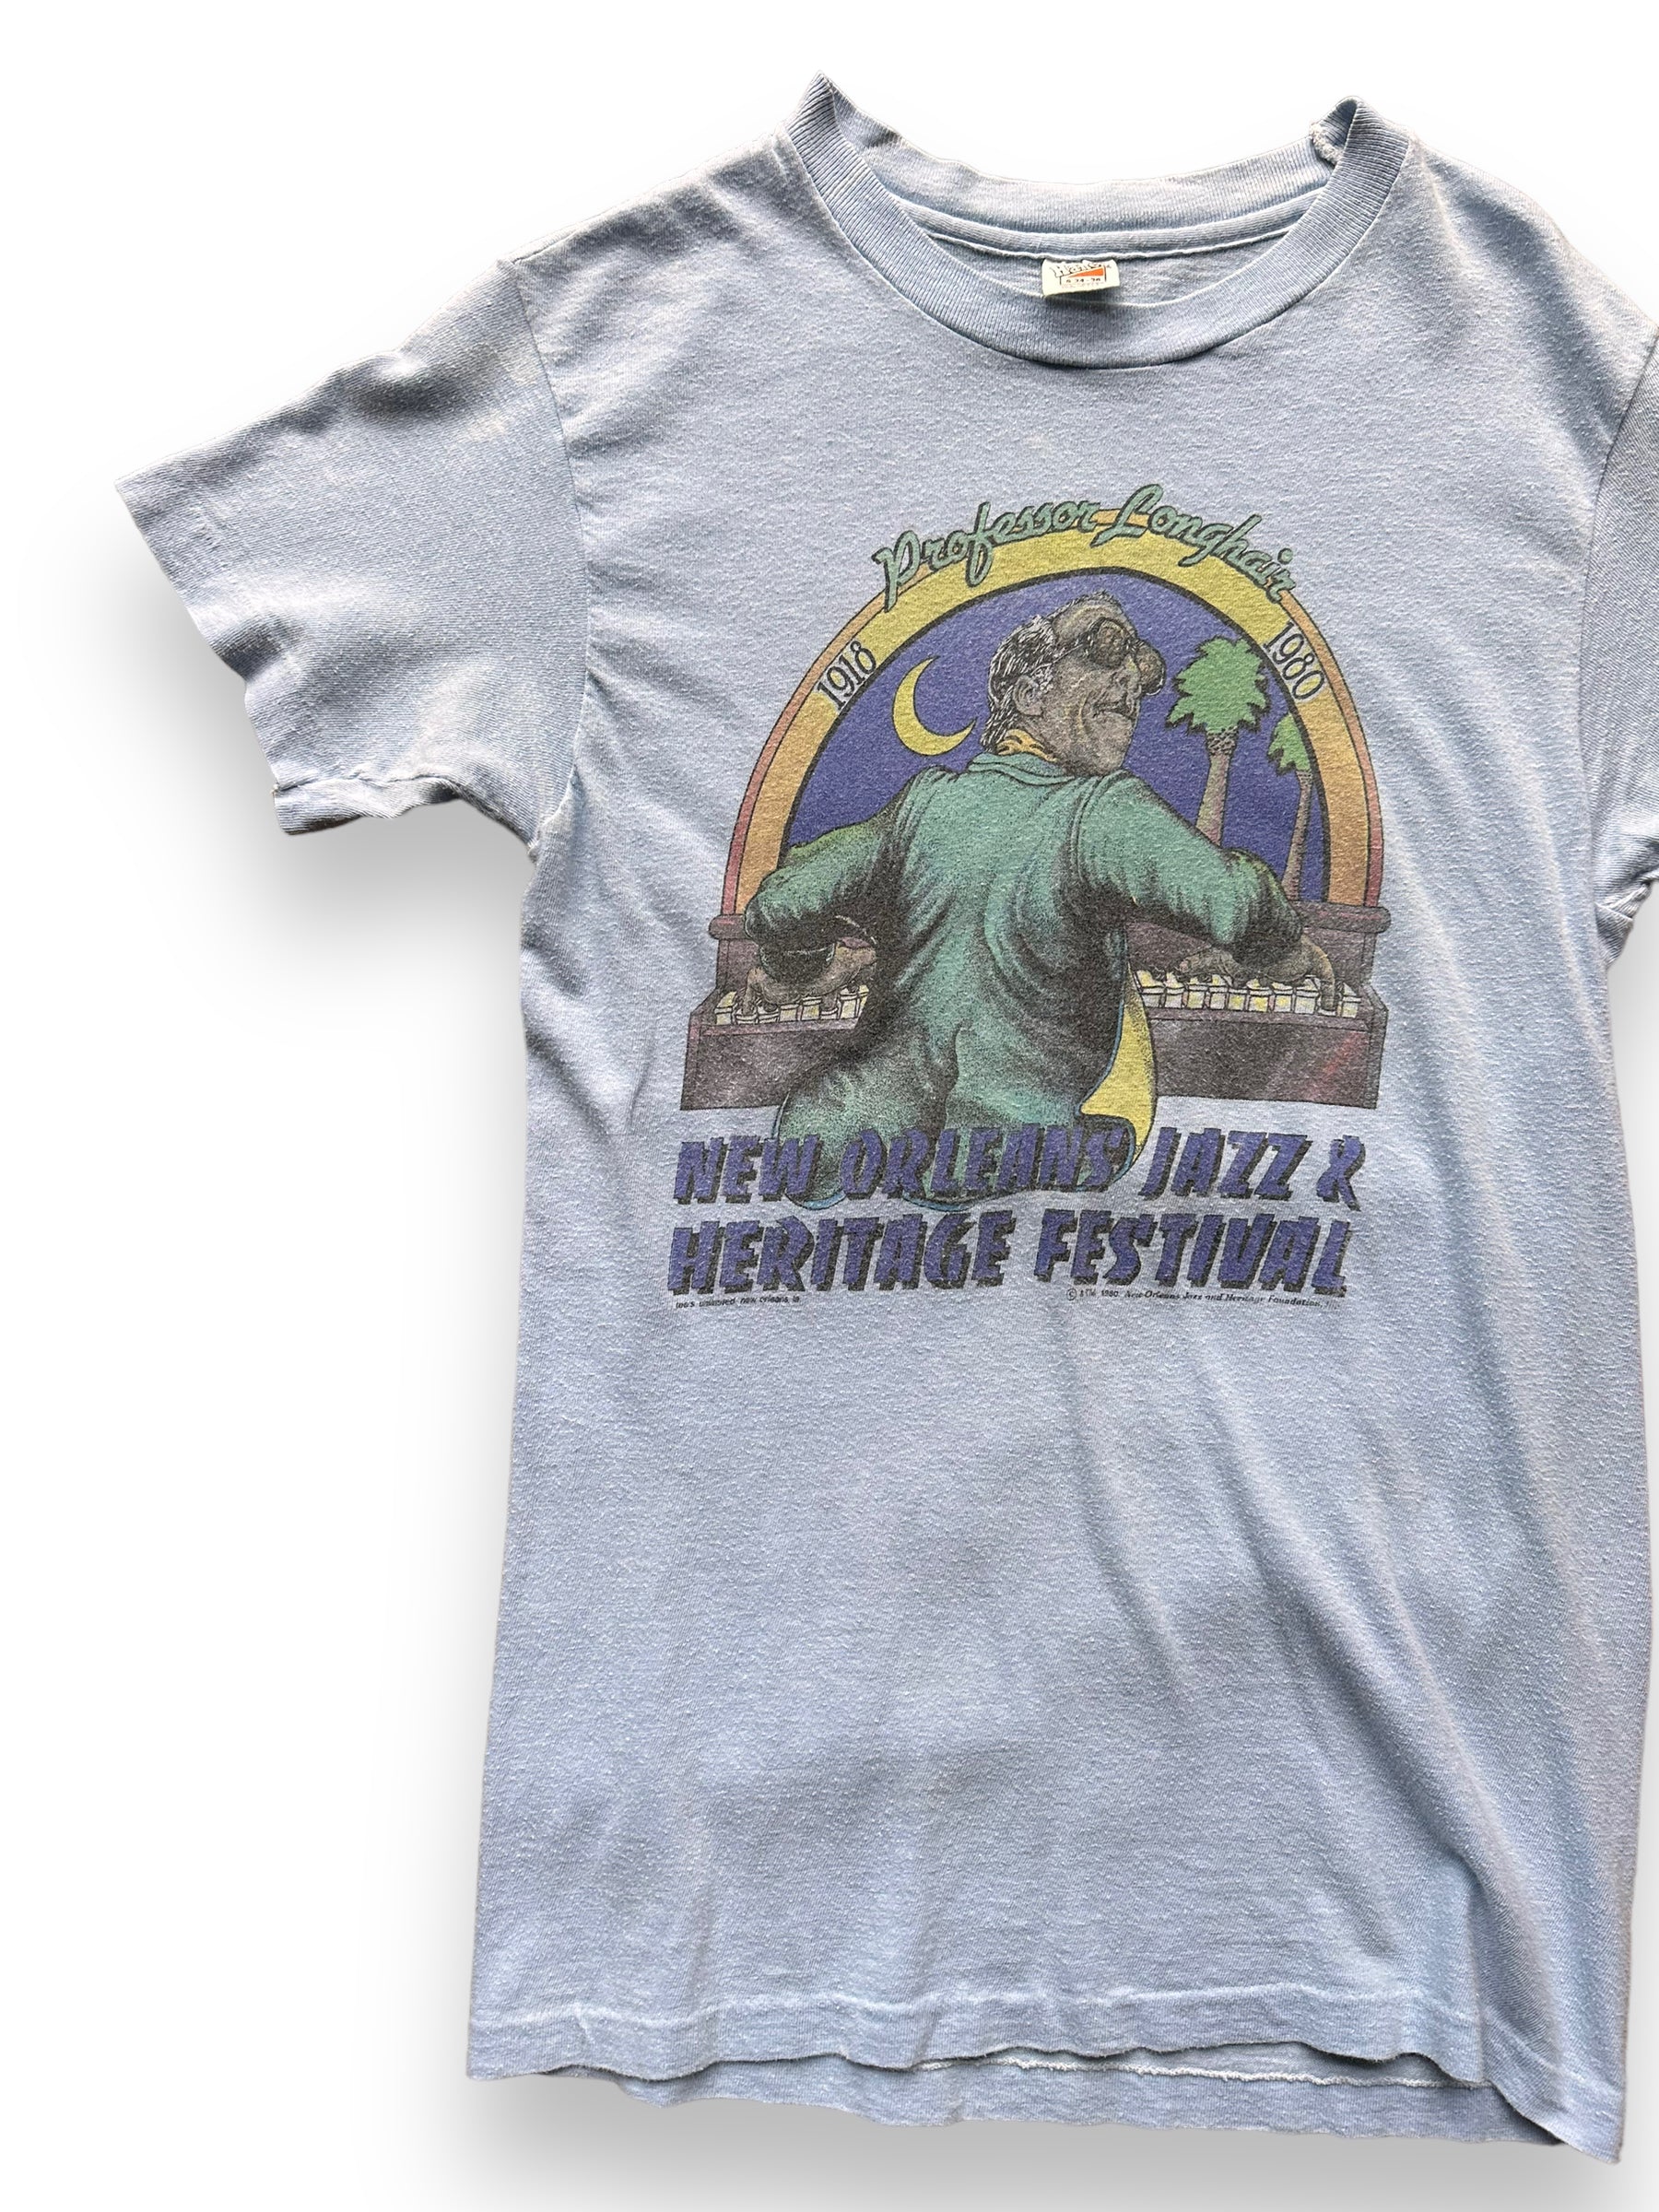 Front Right View of Vintage 1980 New Orleans Jazz & Heritage Professor Longhair Tee SZ S |  Vintage 1980 New Orleans Jazz Tee Seattle | Barn Owl Vintage